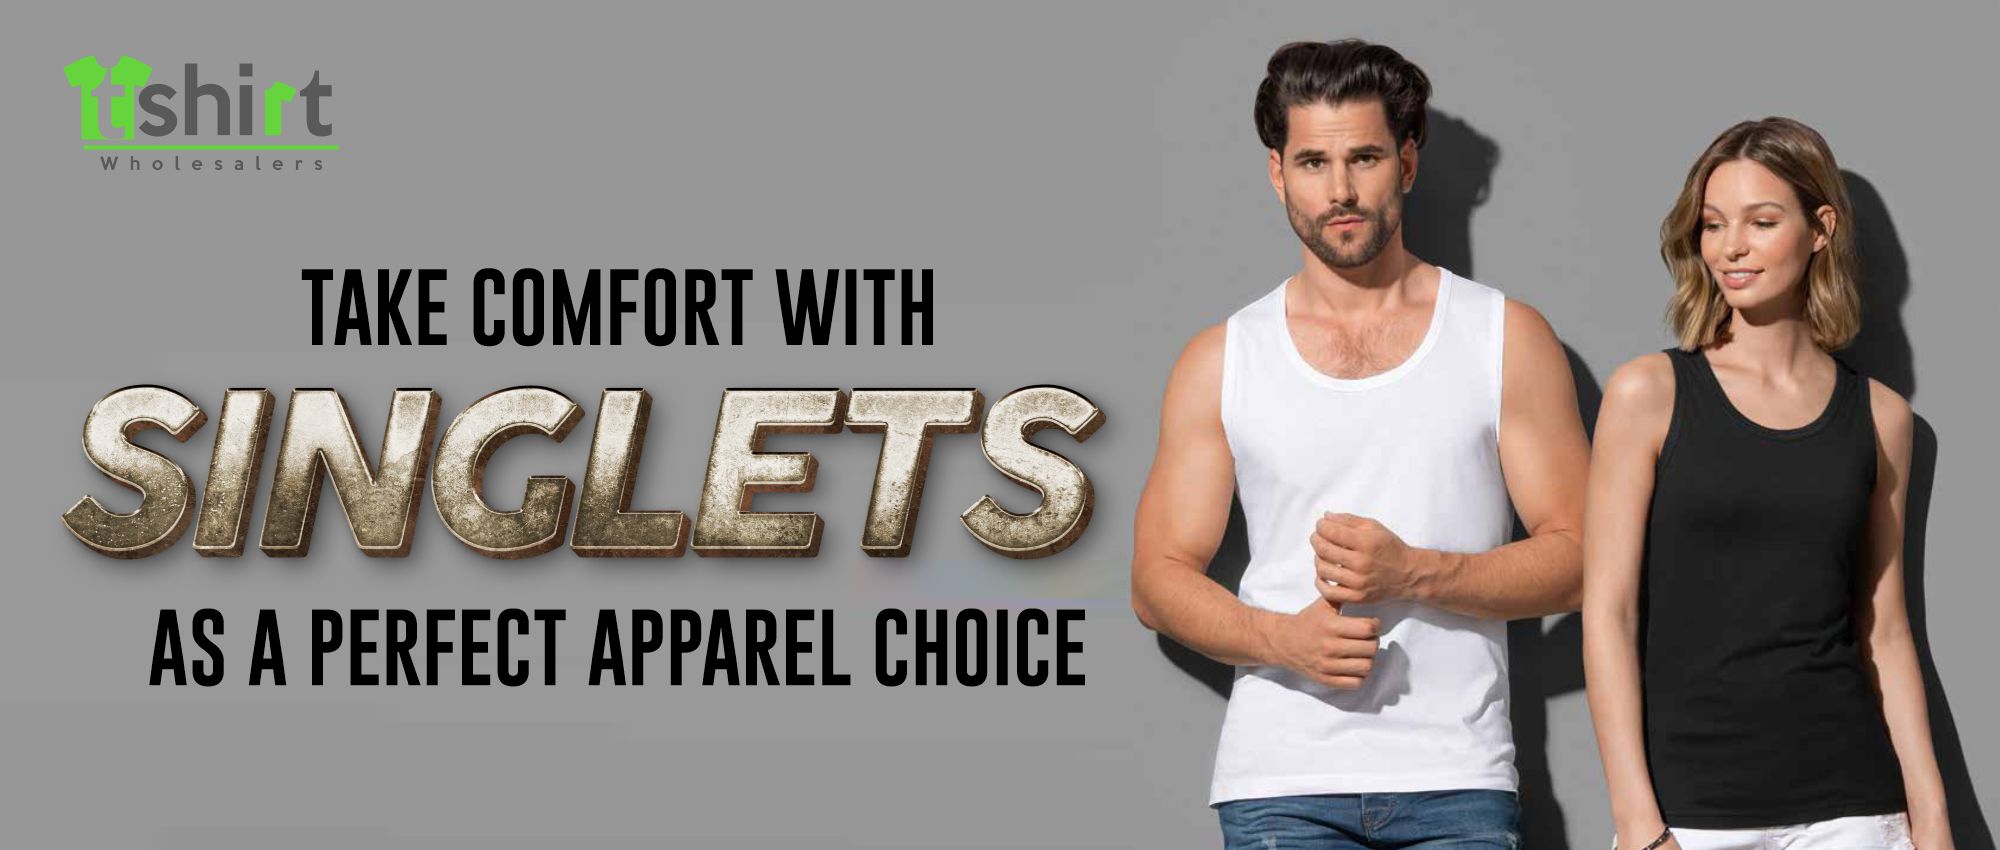 TAKE COMFORT WITH SINGLETS AS A PERFECT APPAREL CHOICE